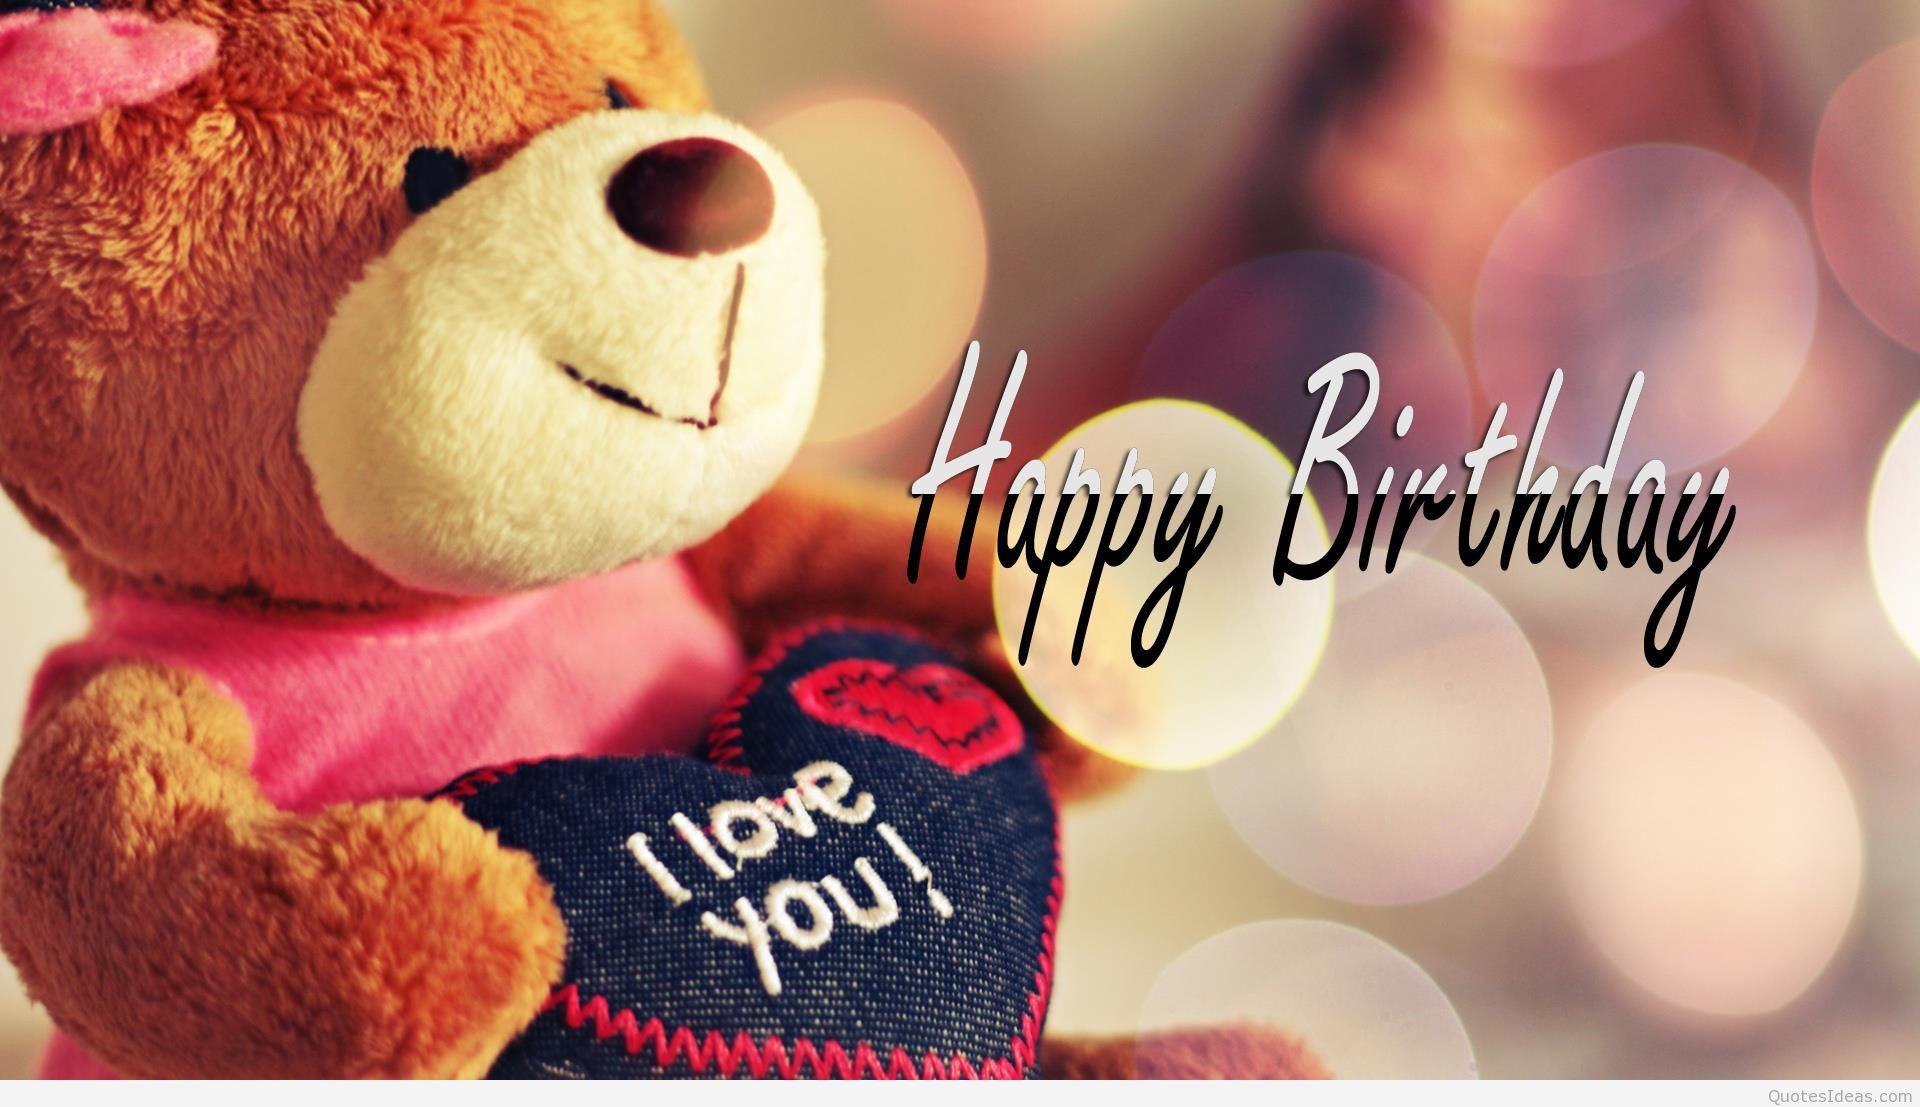 I Love You Happy Birthday Quotes
 Happy birthday love quotes messages 2015 2016